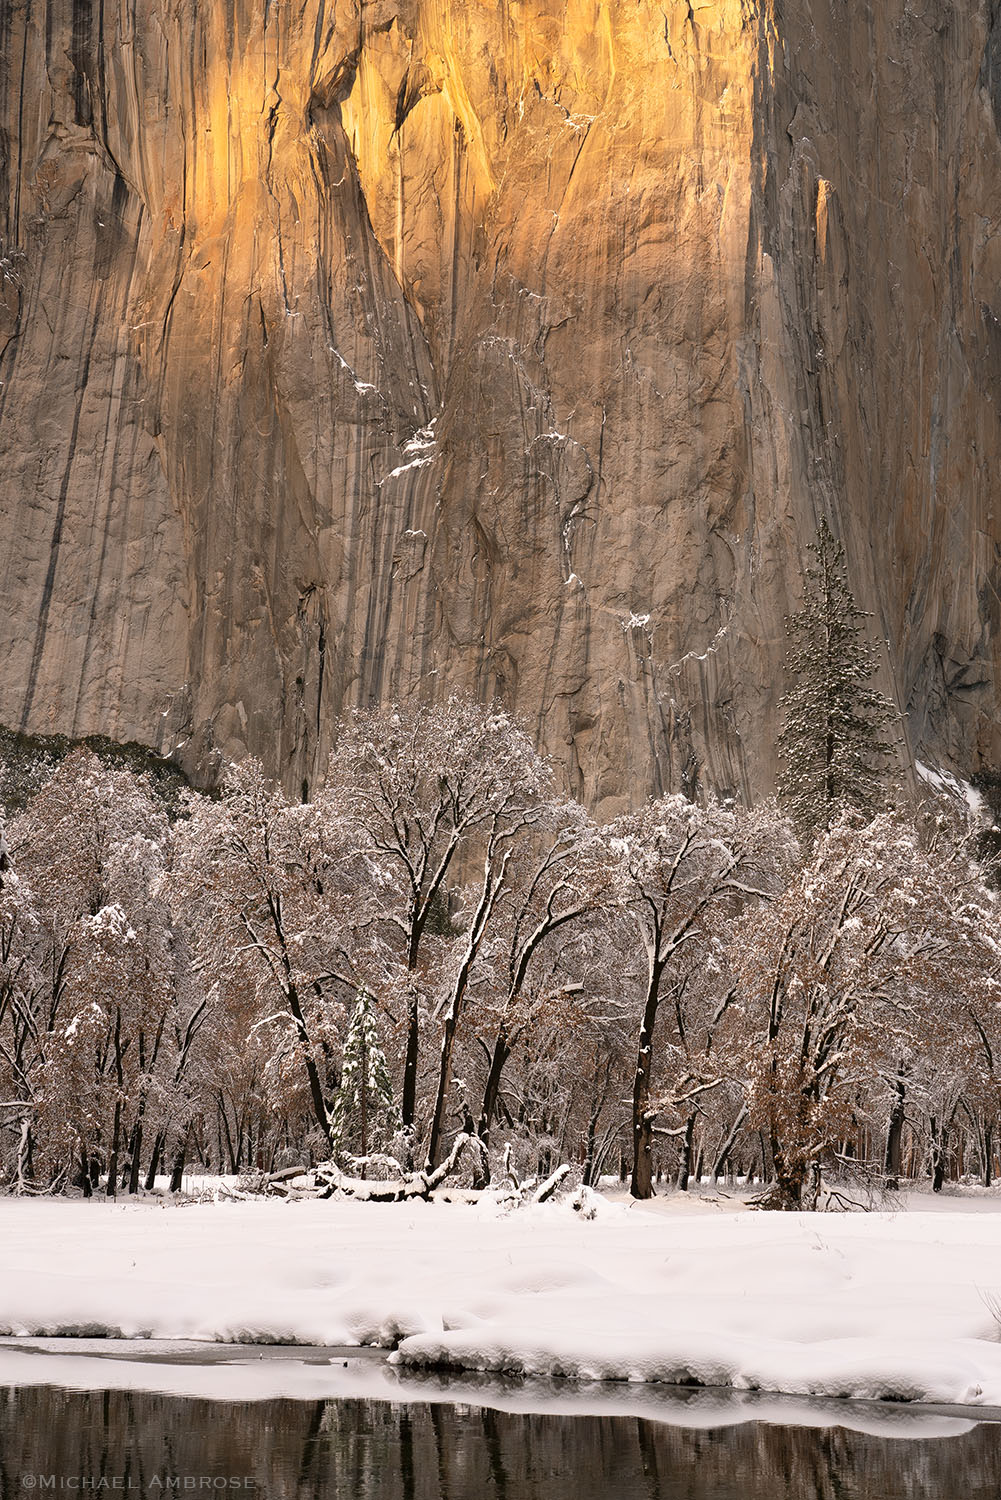 The Merced River stands still in front of the "heart" of Iconic El Capitan , which is lit with warm light on a snowy, Yosemite National Park evening.